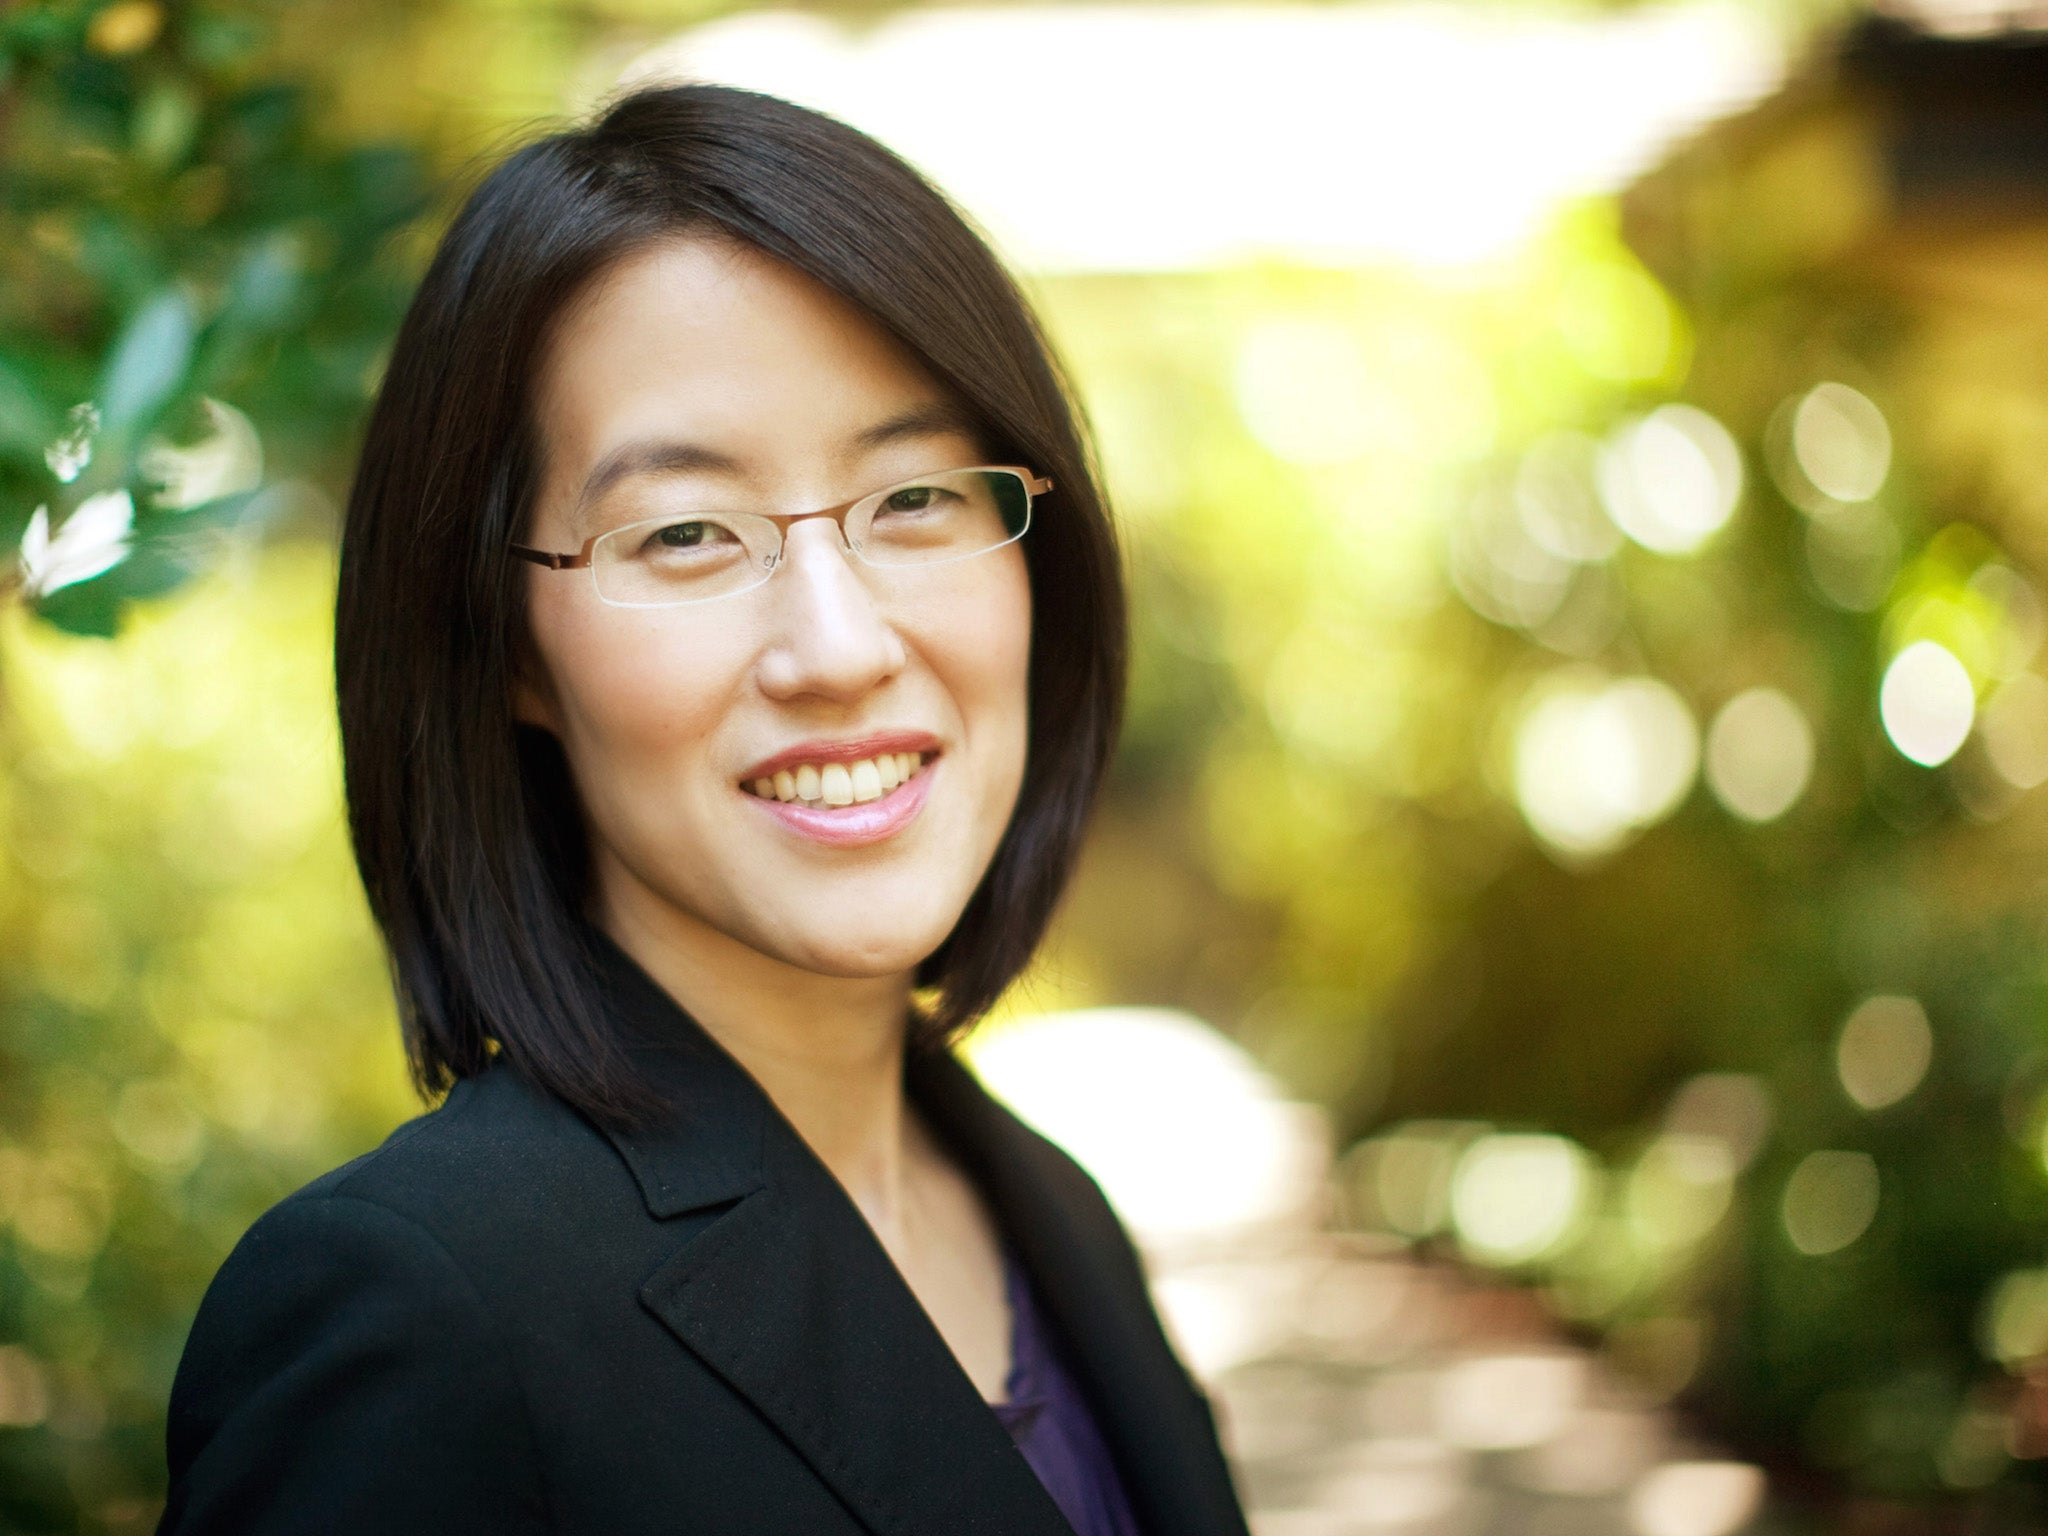 Ellen Pao claims she was a victim of gender discrimination